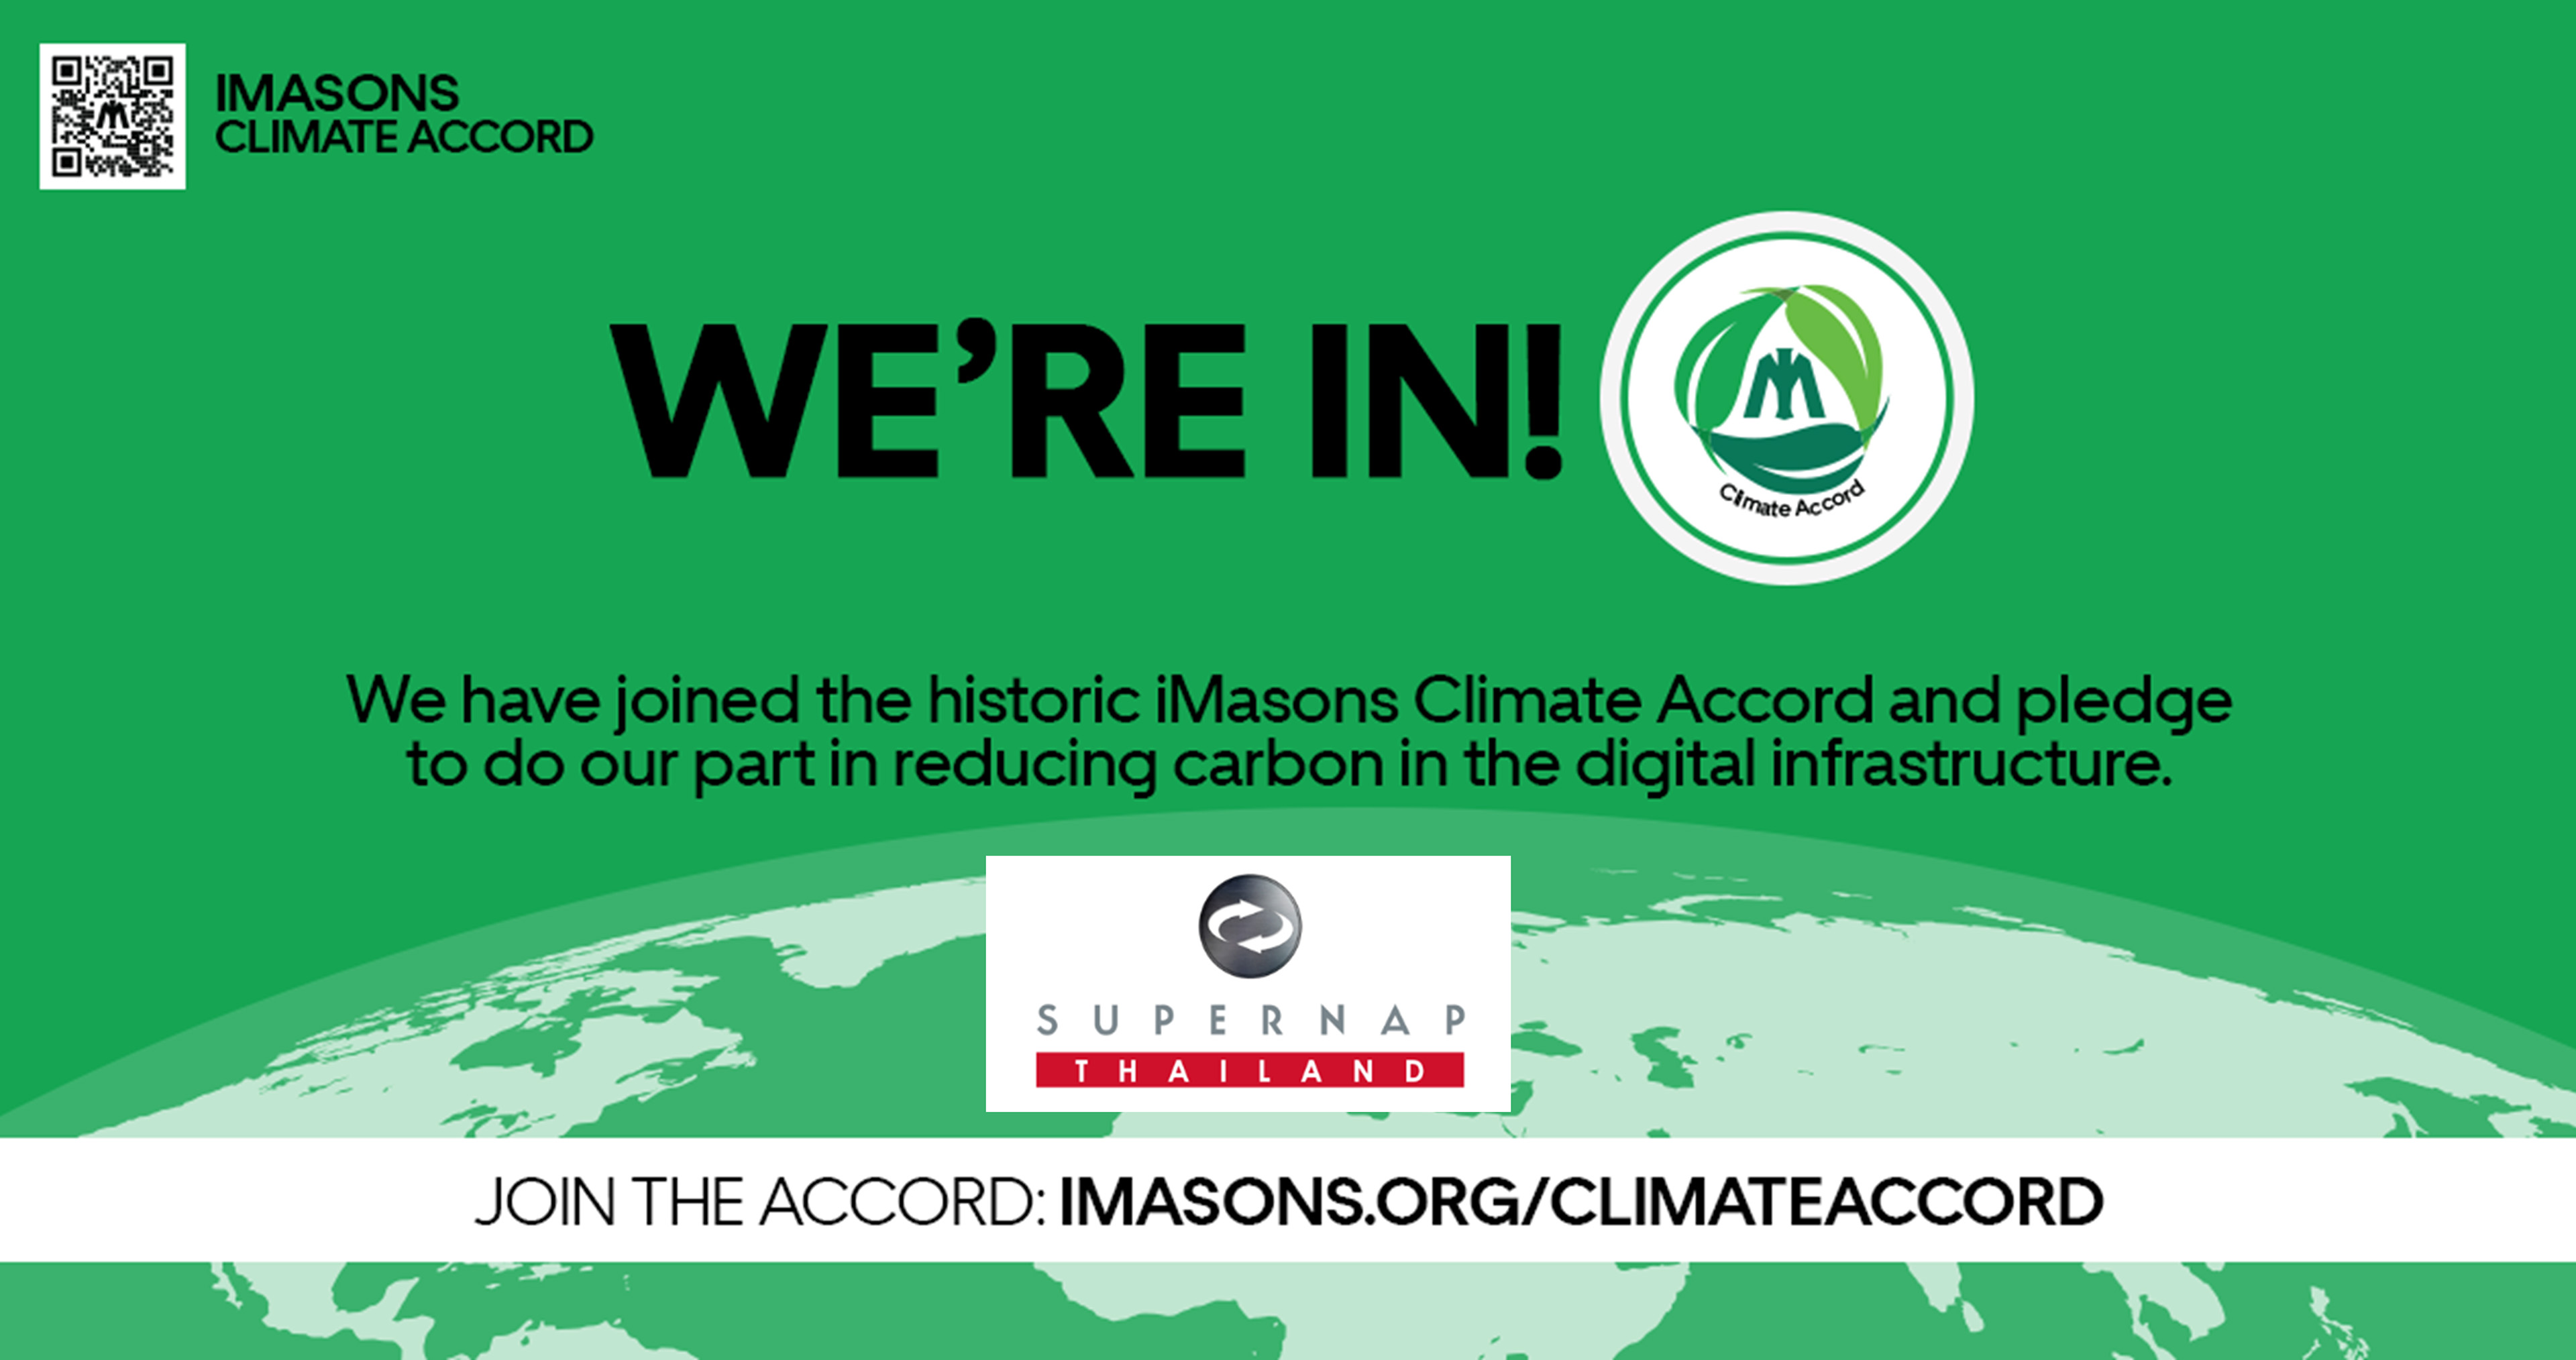 SUPERNAP (Thailand) joined the Infrastructure Masons (iMasons) Climate Accord (ICA).